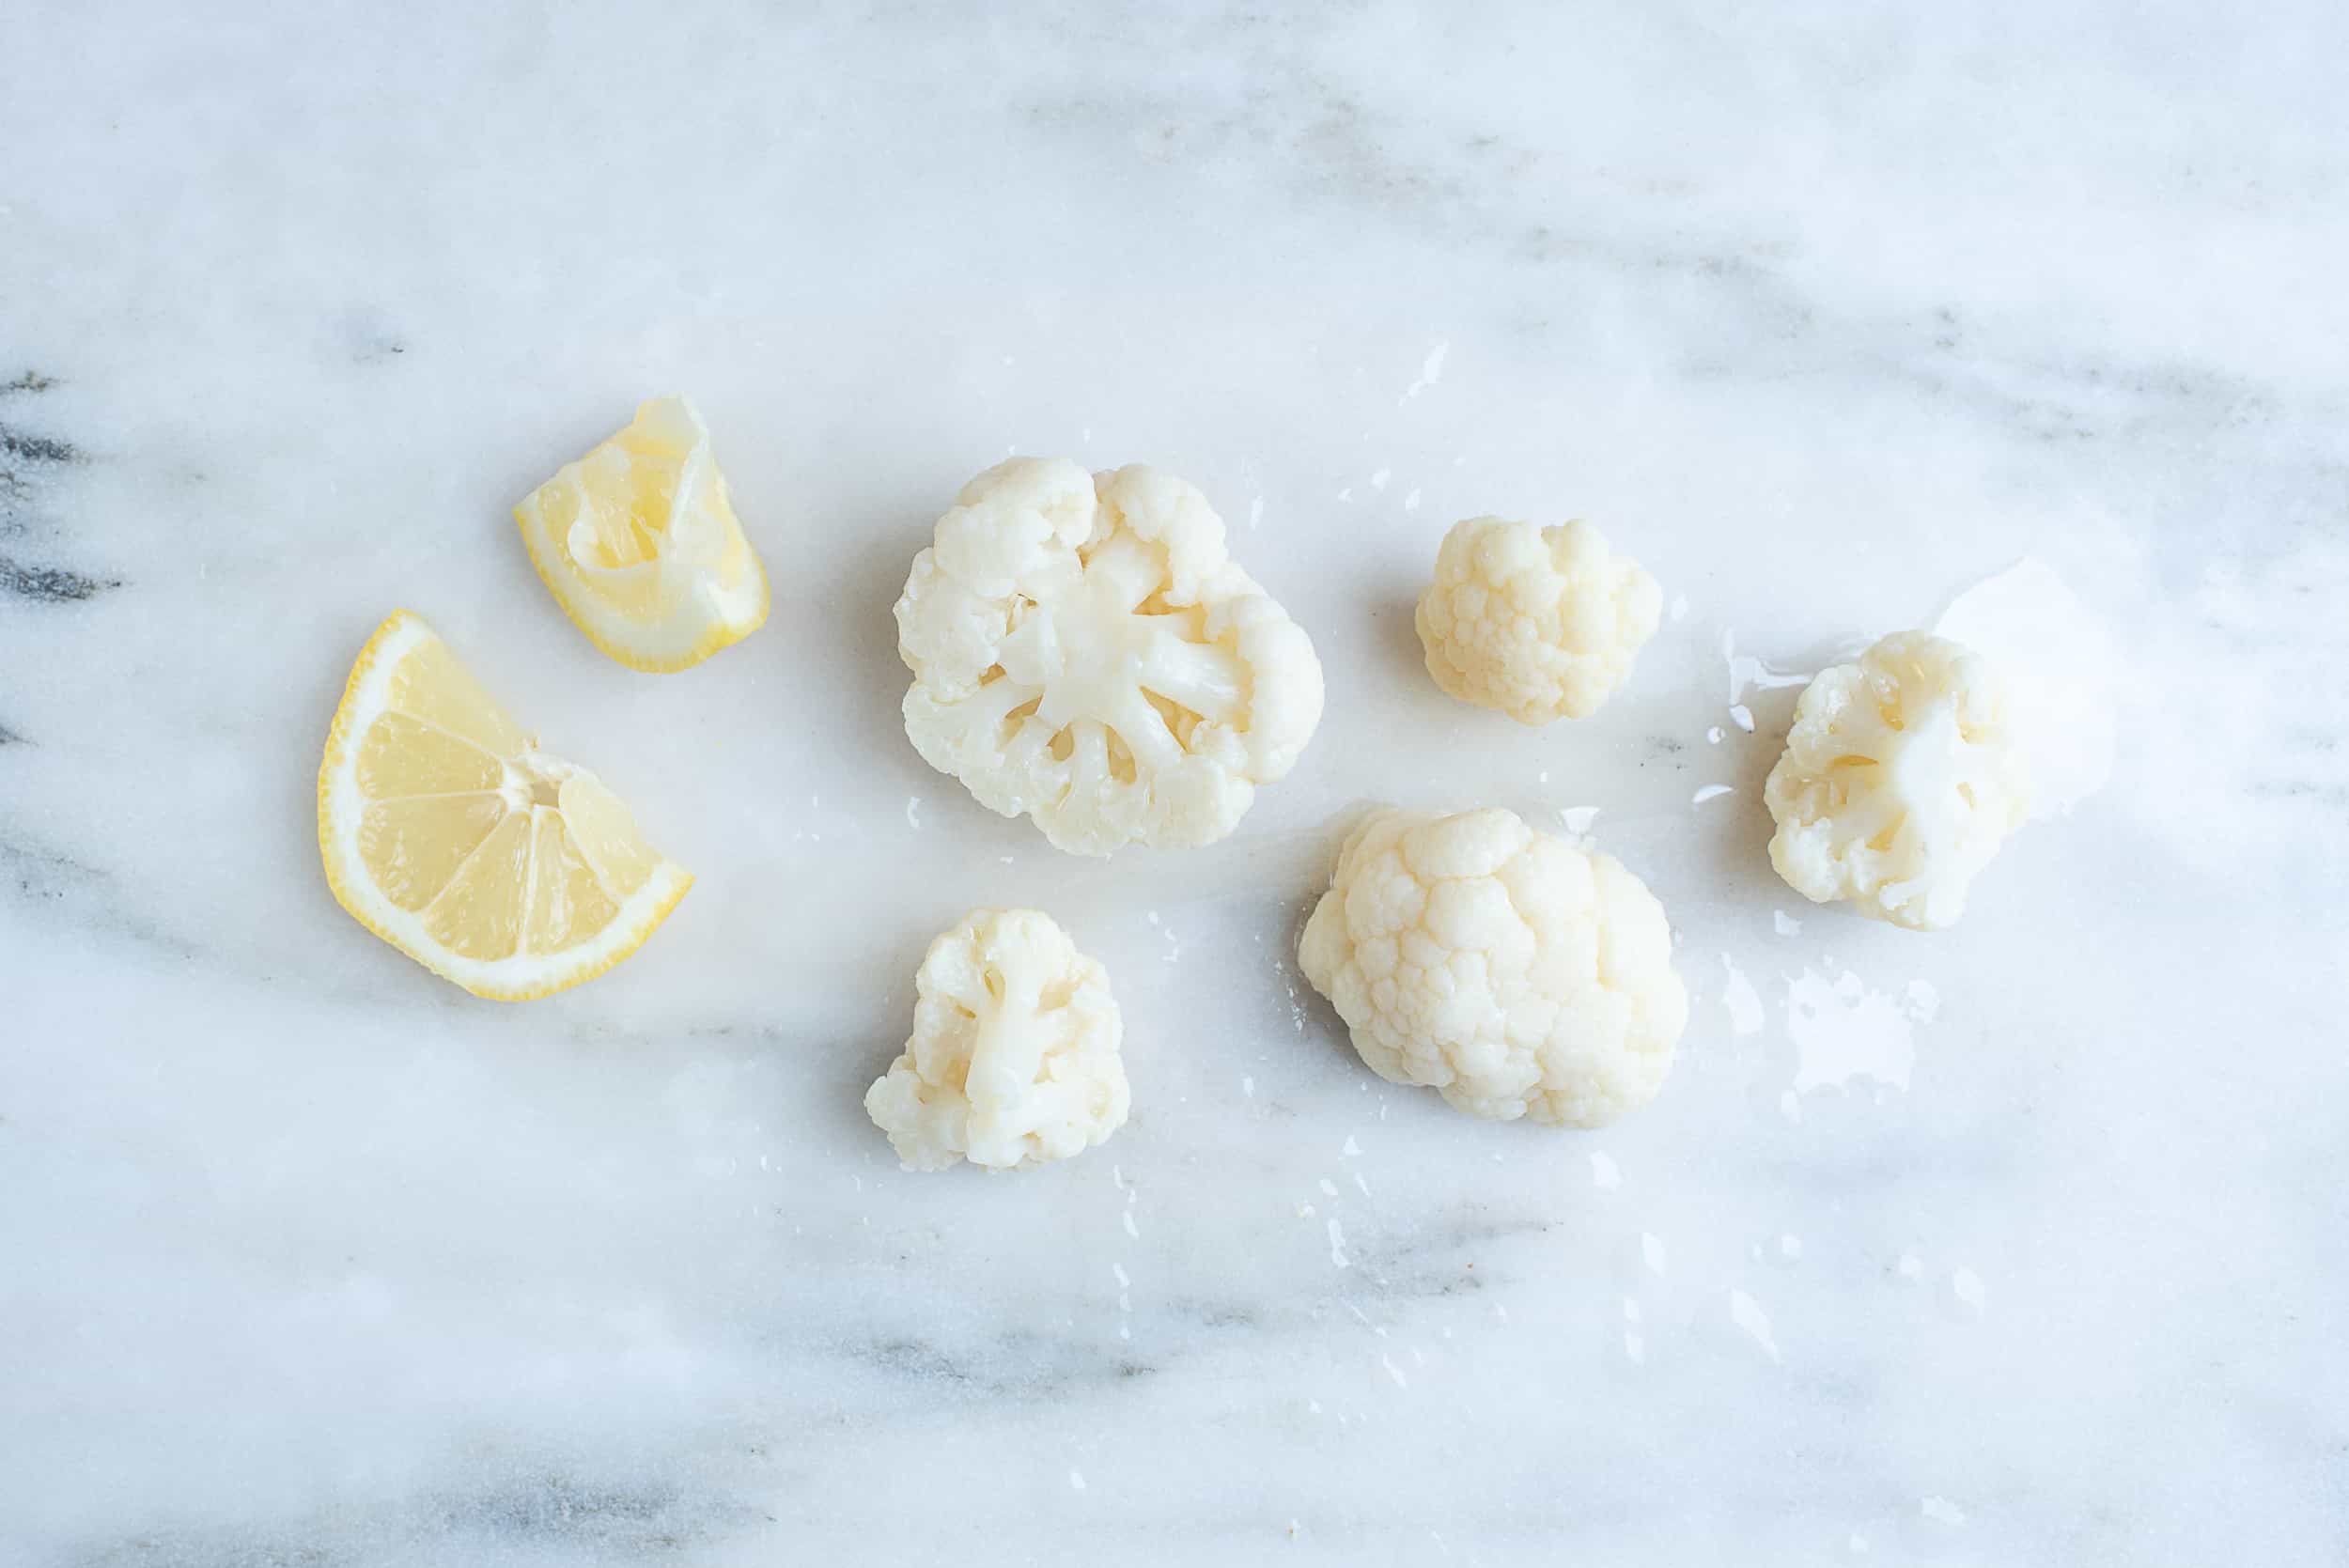 five steamed cauliflower florets sitting on a countertop with 2 slices of lemon next to them